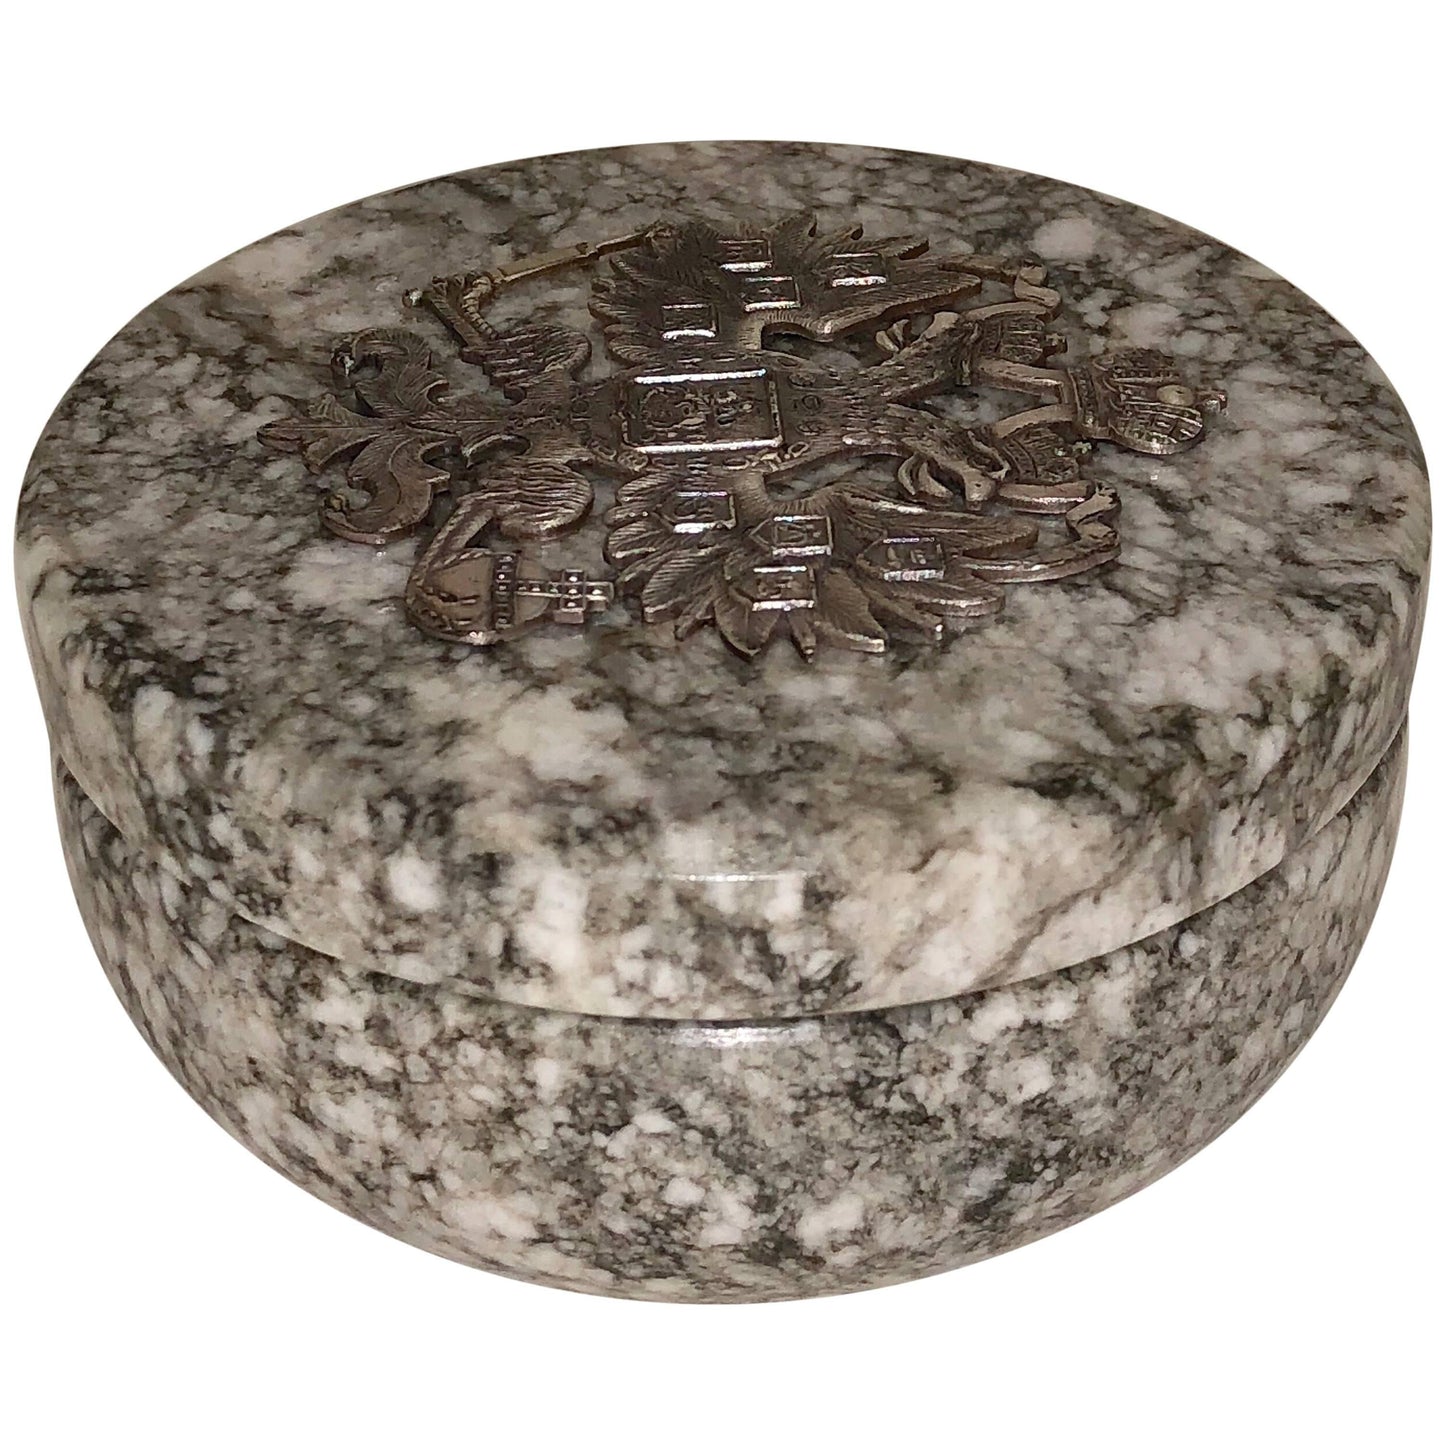 Russian Tiger Skin Marble Round Box, Early 20th Century